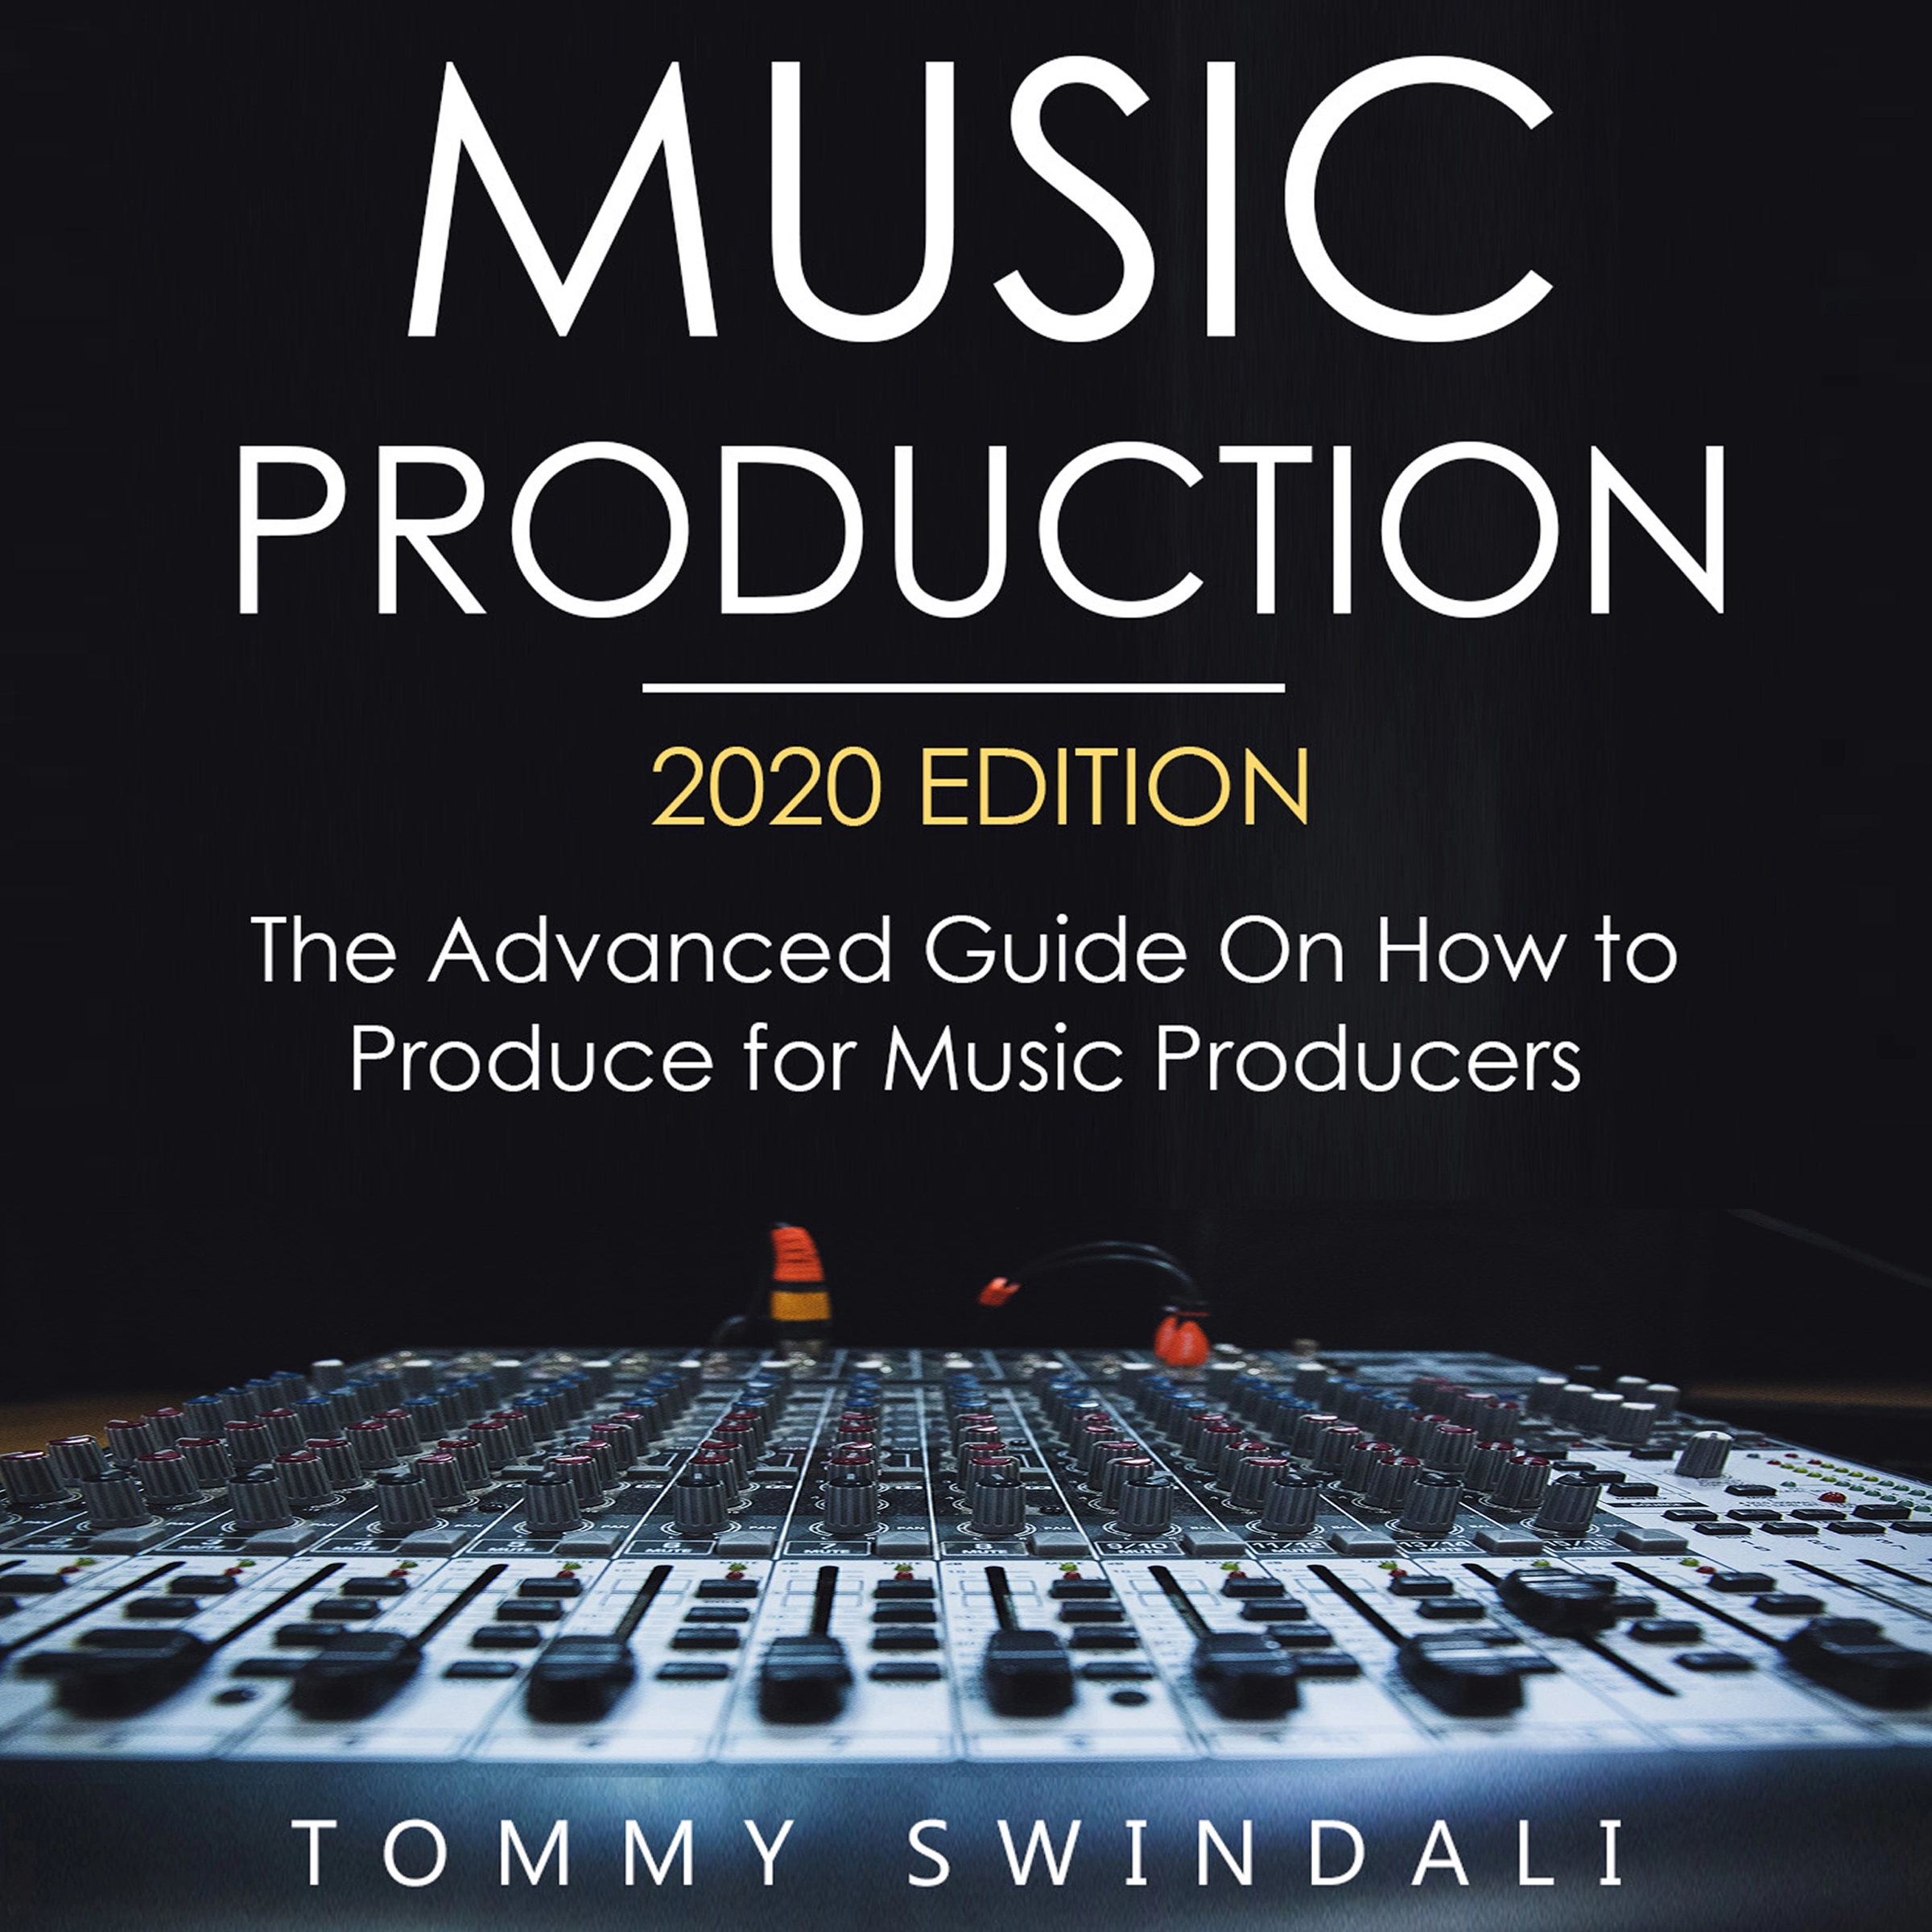 Music Production, 2020 Edition The Advanced Guide on How to Produce for Music Producers by Tommy Swindali Audiobook